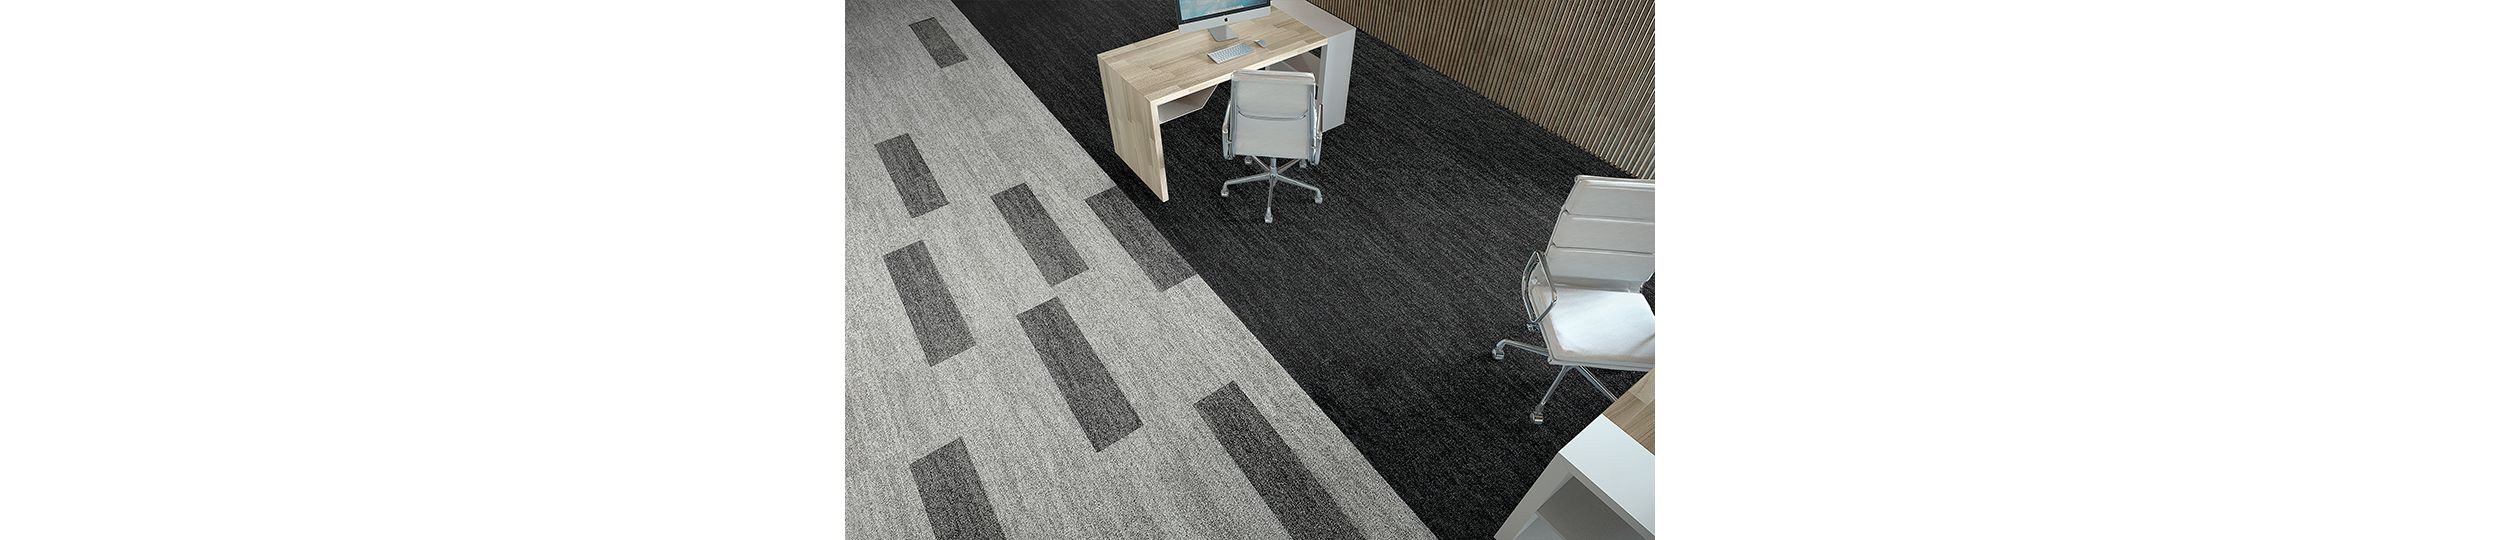 Interface Open Air 402 plank carpet tile in overhead view with small work desk and wood slat wall imagen número 5